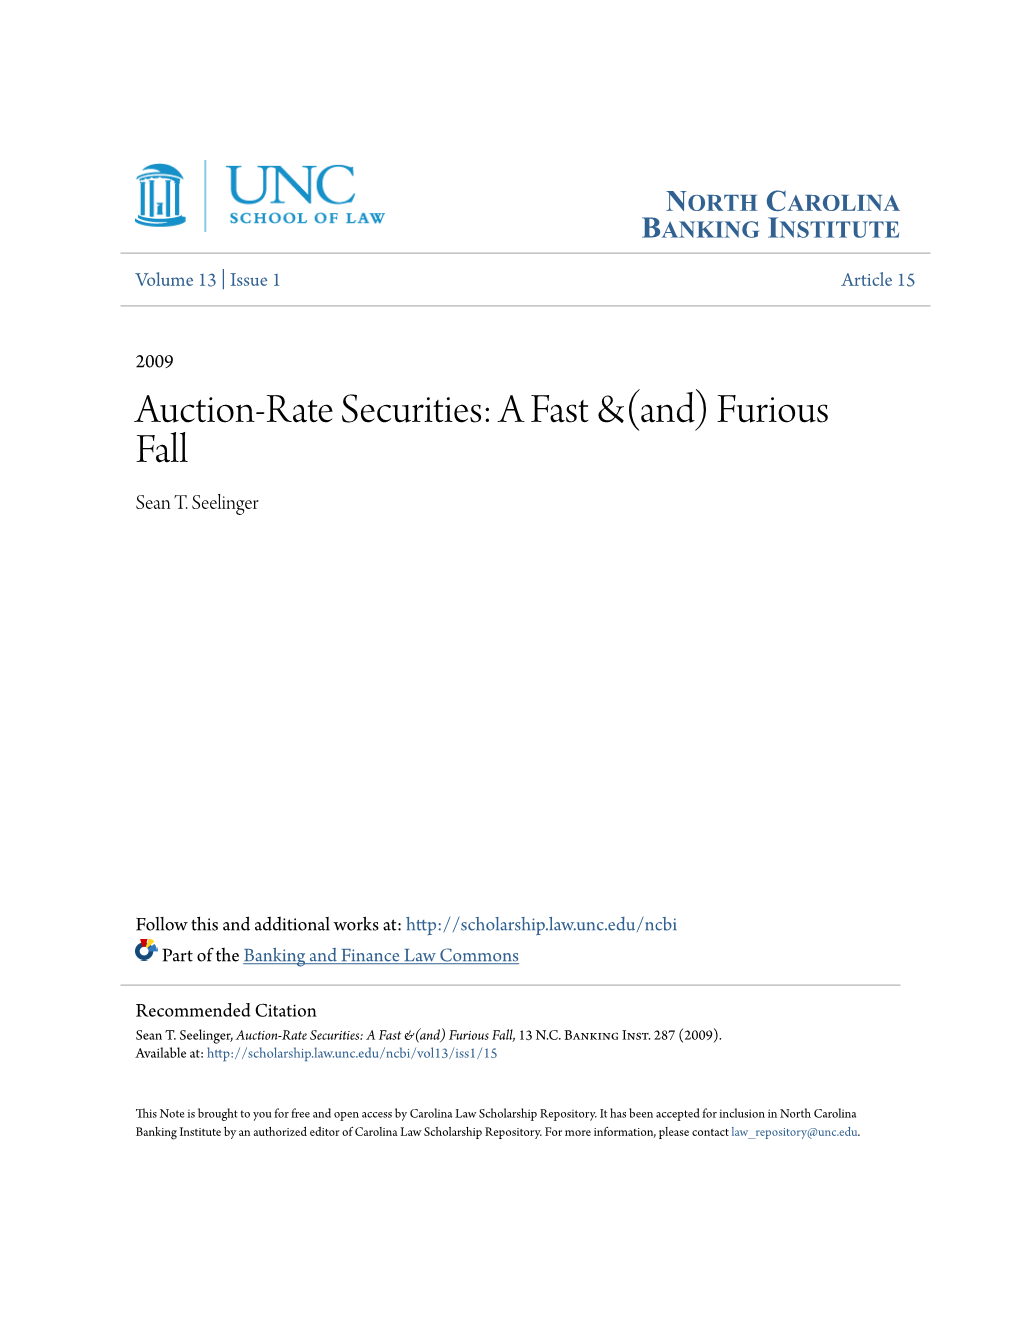 Auction-Rate Securities: a Fast &(And) Furious Fall Sean T